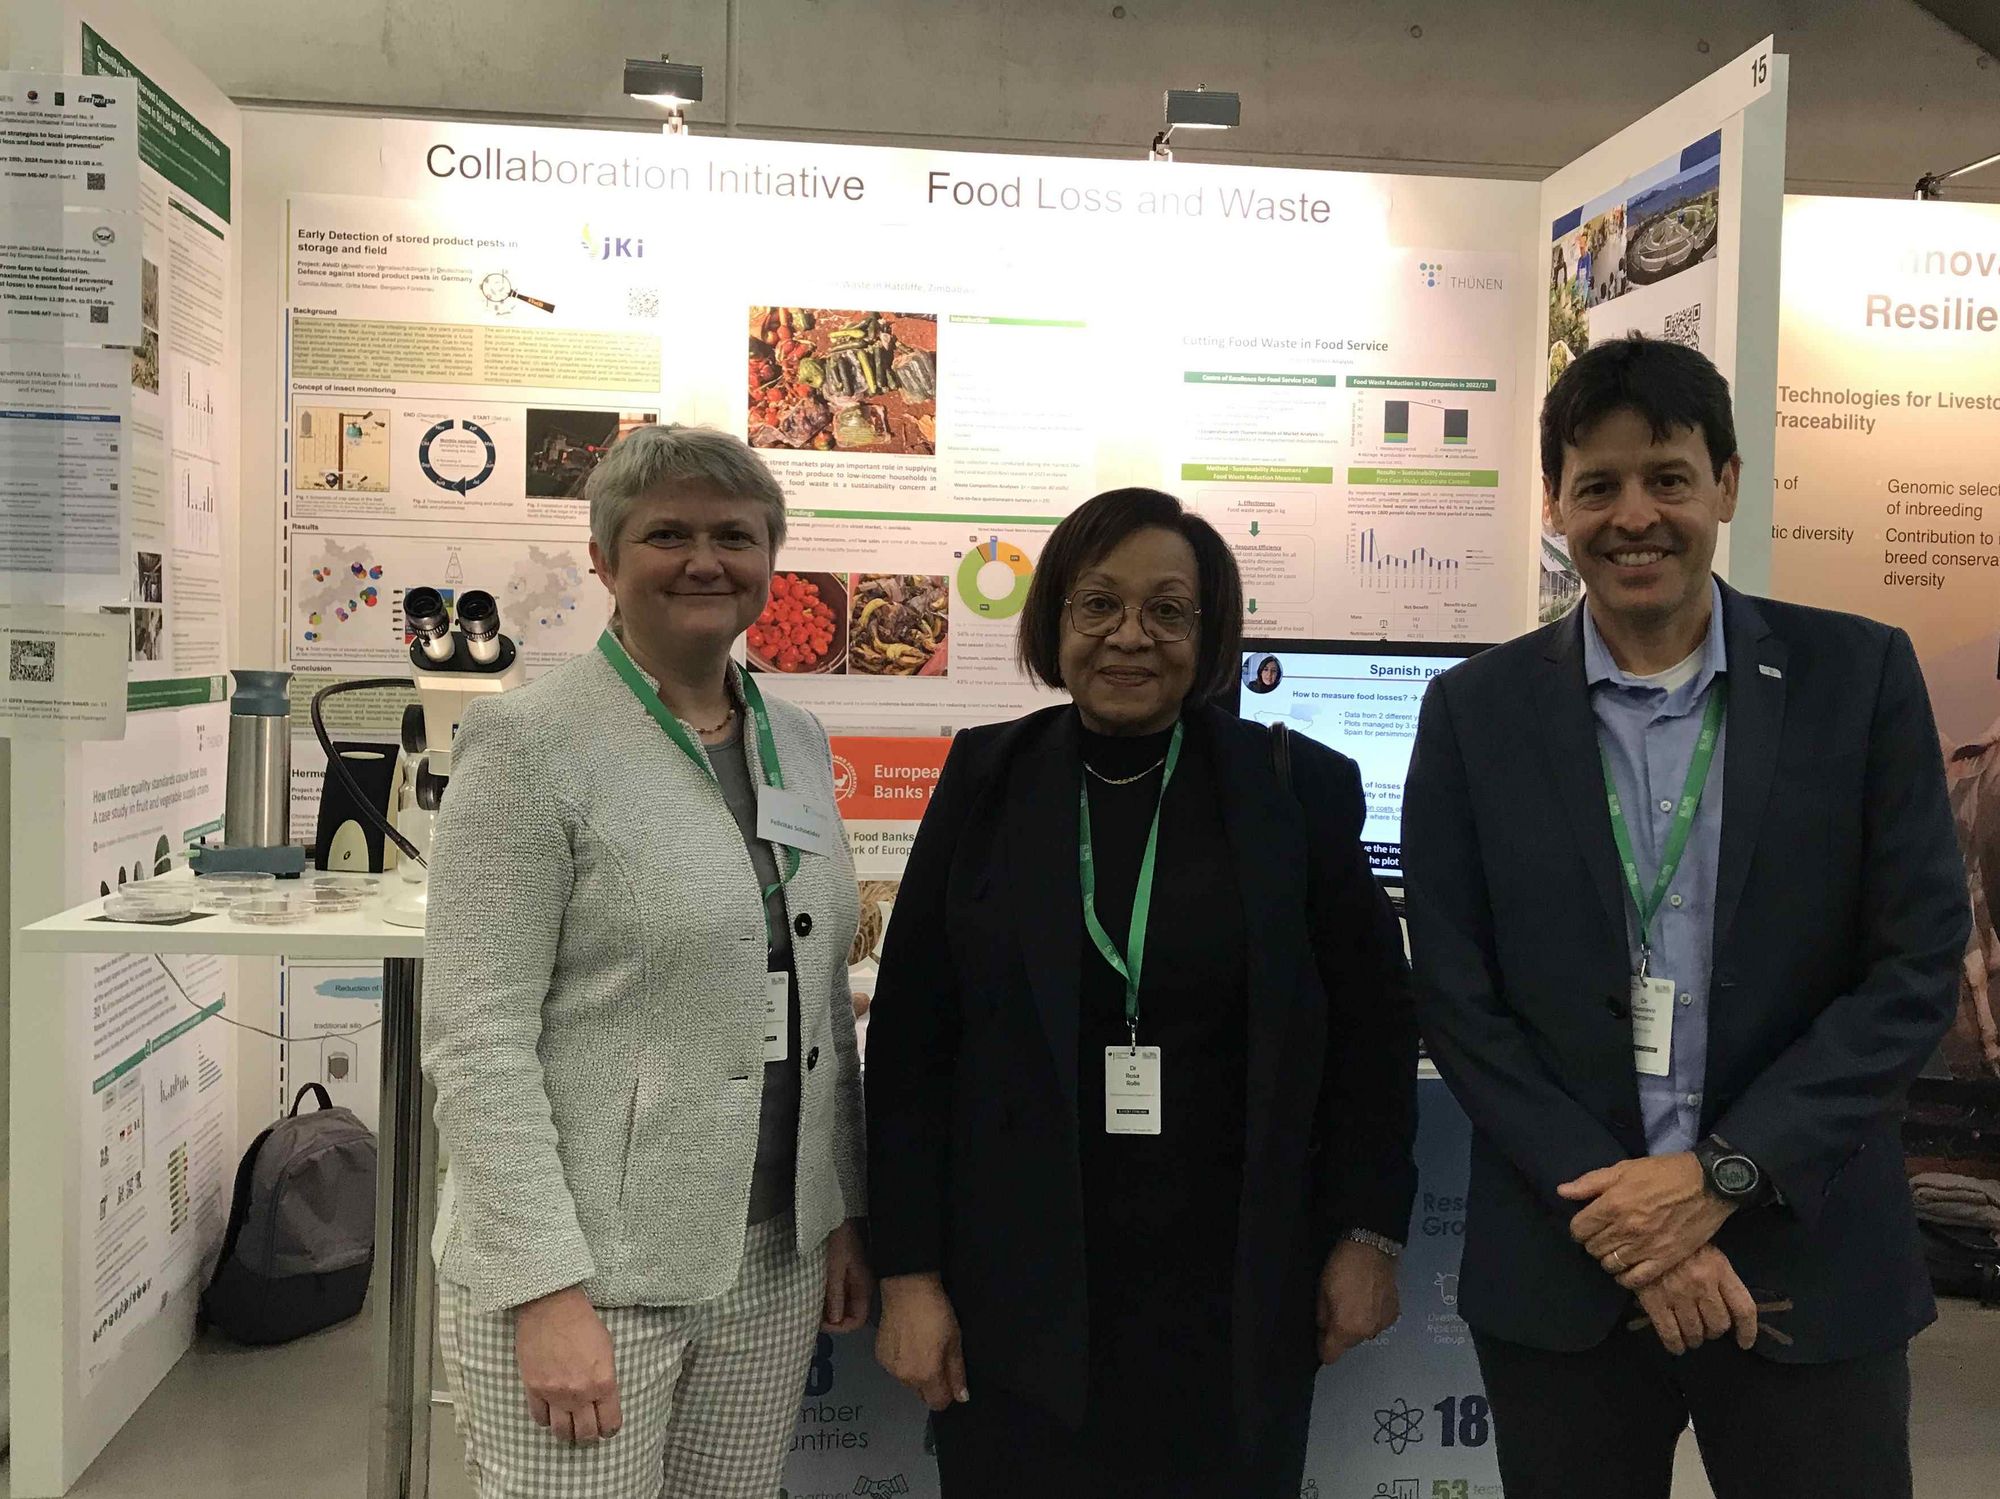 This is a group photos of Felicitas Schneider (coordinator Collaboration Initiative FLW), Rosa Rolle (Food and Agriculture Organisation, FAO), Gustavo Porpino (Embrapa) in front of our GFFA stall.